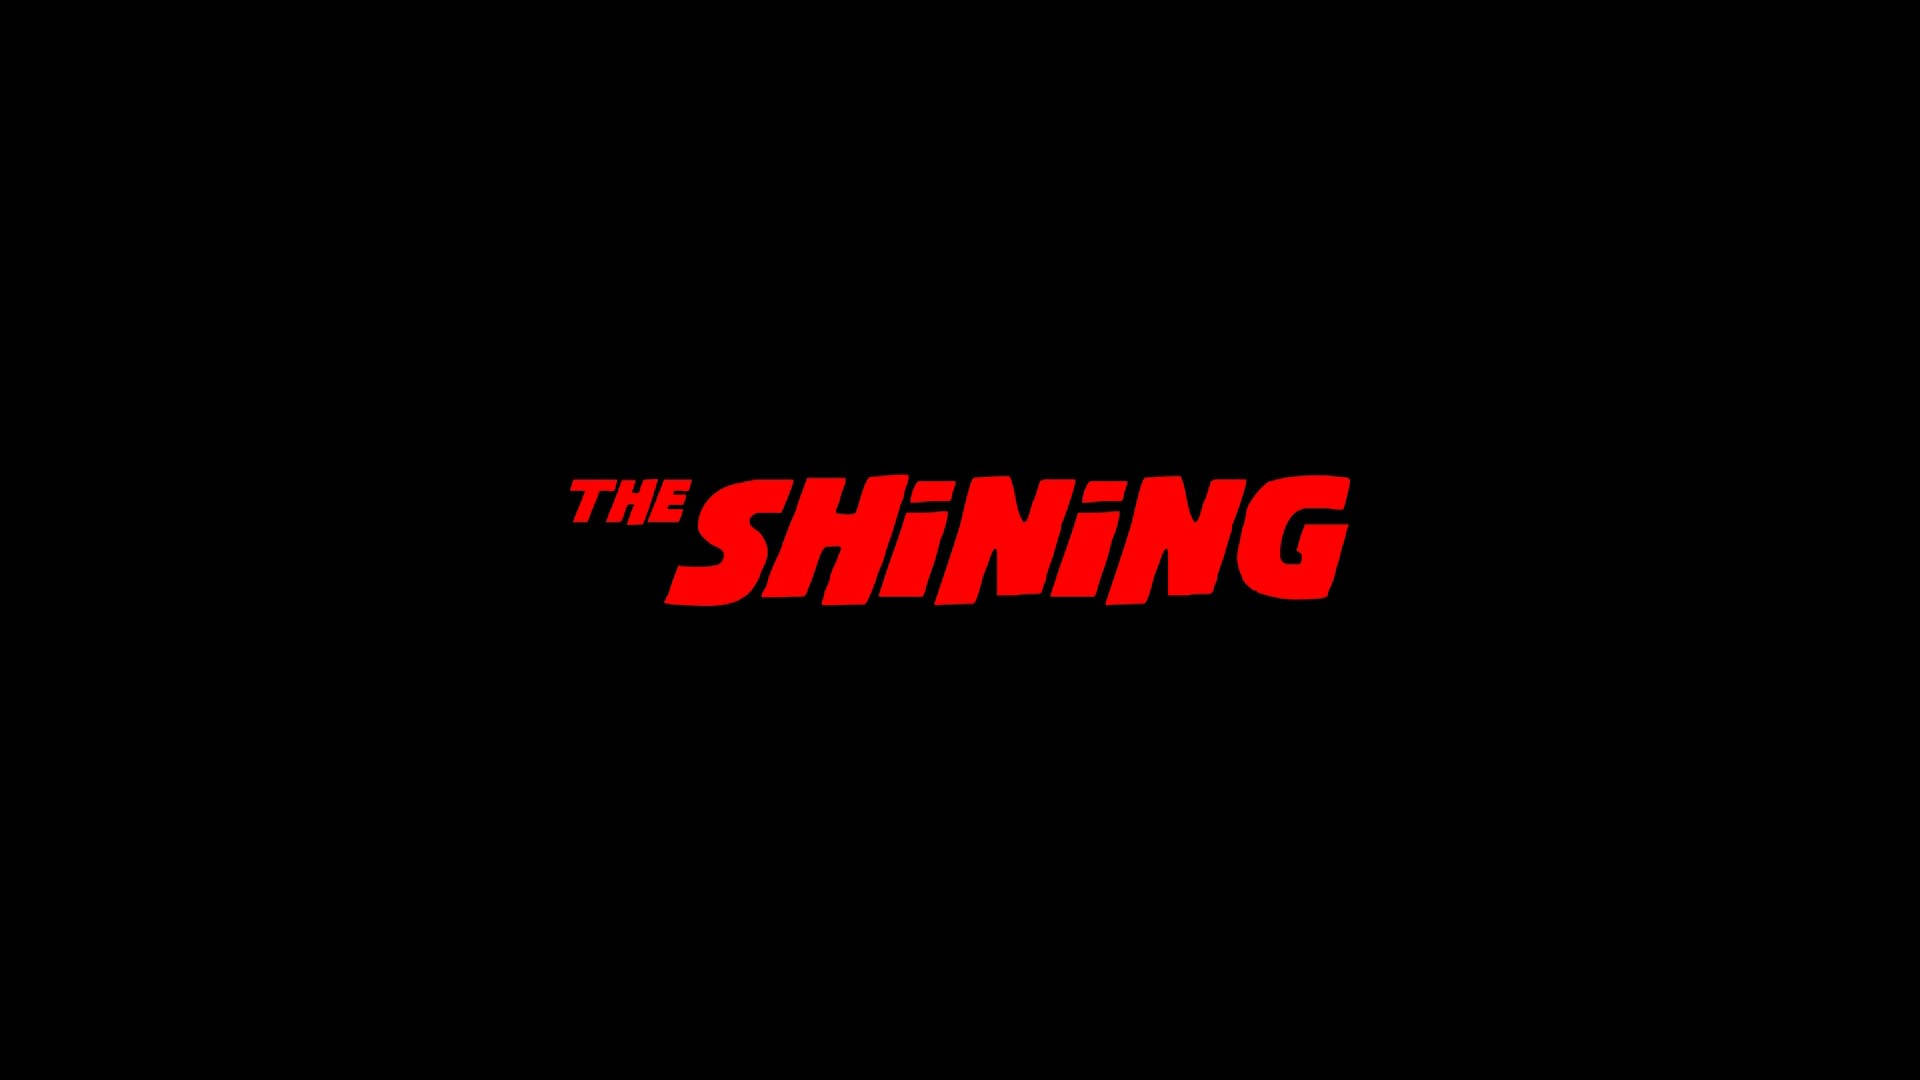 The Shining Text Poster Wallpaper